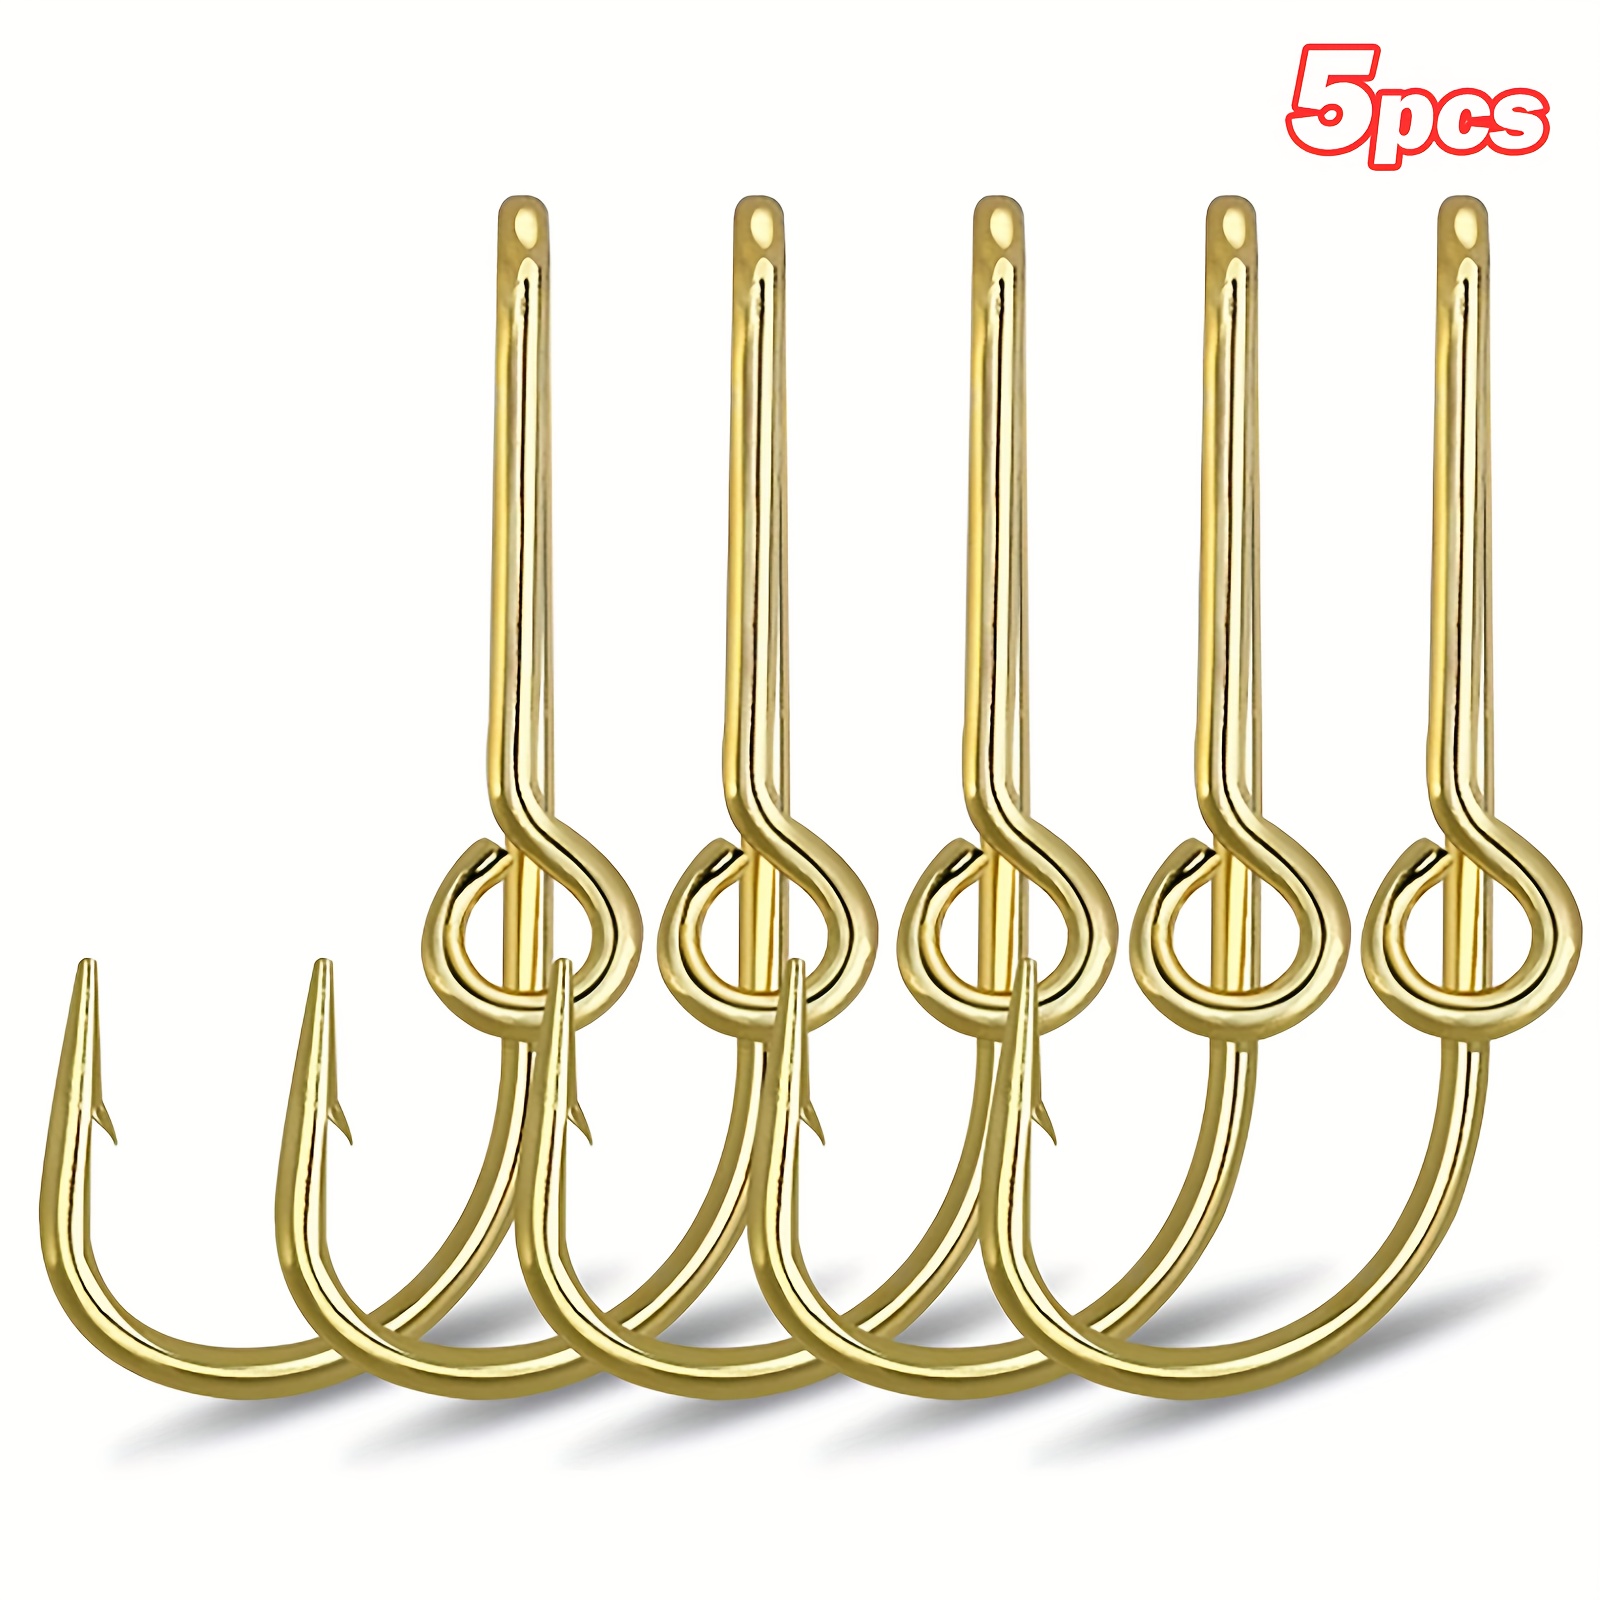 Golden-Plated Fish Hook Hat Clips for Sale